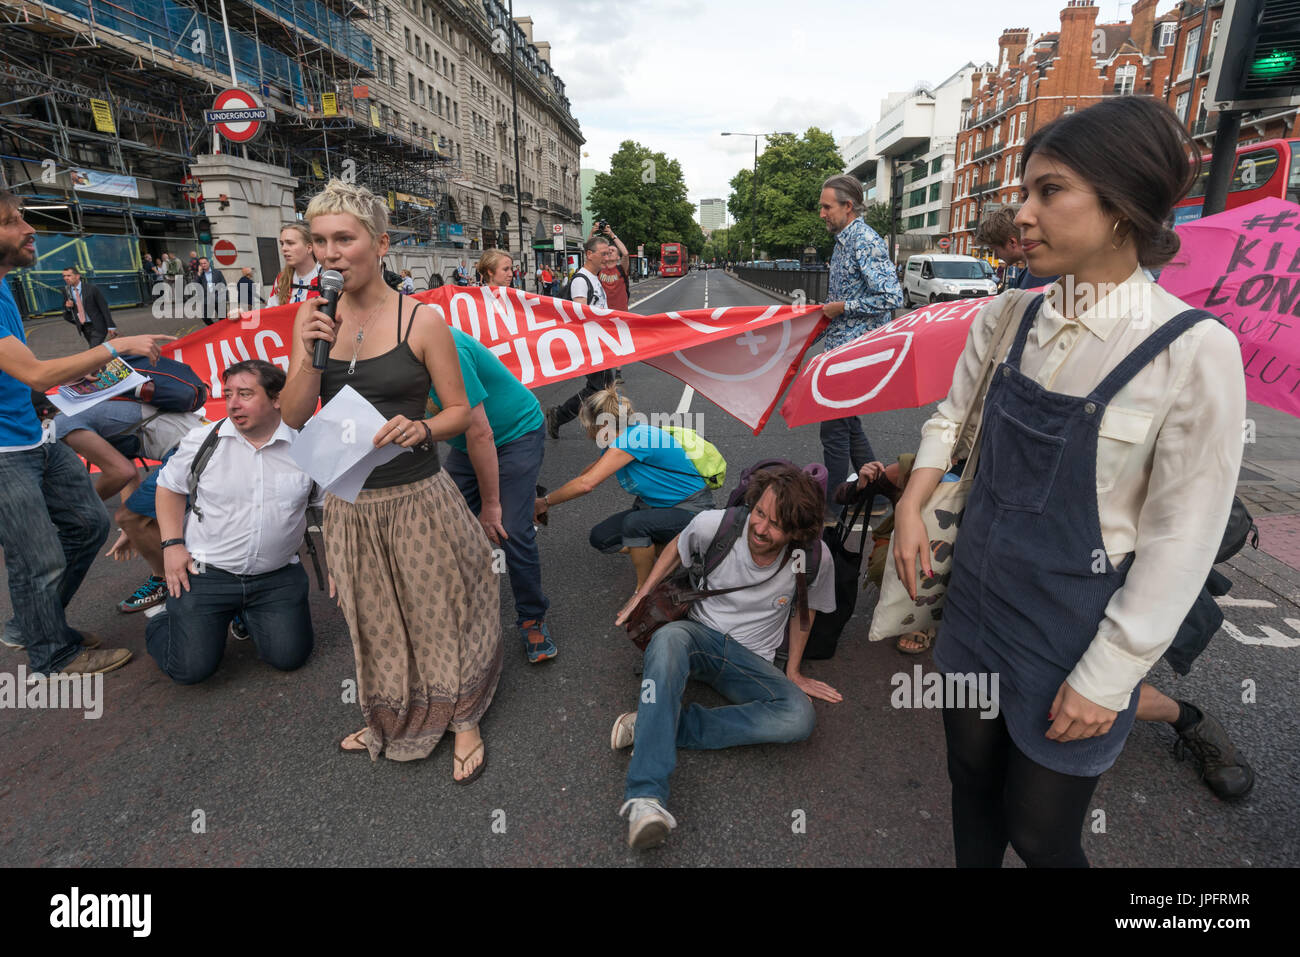 London, UK. 1st August 2017. Rising Up environmental protesters blocking the busy Marylebone Road at Baker St read out a statement explaining their 'Staying Alive' road-block disco protest to raise awareness and call for urgent action over the high pollution levels from traffic on London streets which cause 10,000 premature deaths each year. They walked into the road with banners and umbrellas with the message Stop Killing Londoners and sat down while the statement was read explaining why they were protesting and that it would only be a delay of 5-10 minutes, then danced in front of the blocke Stock Photo